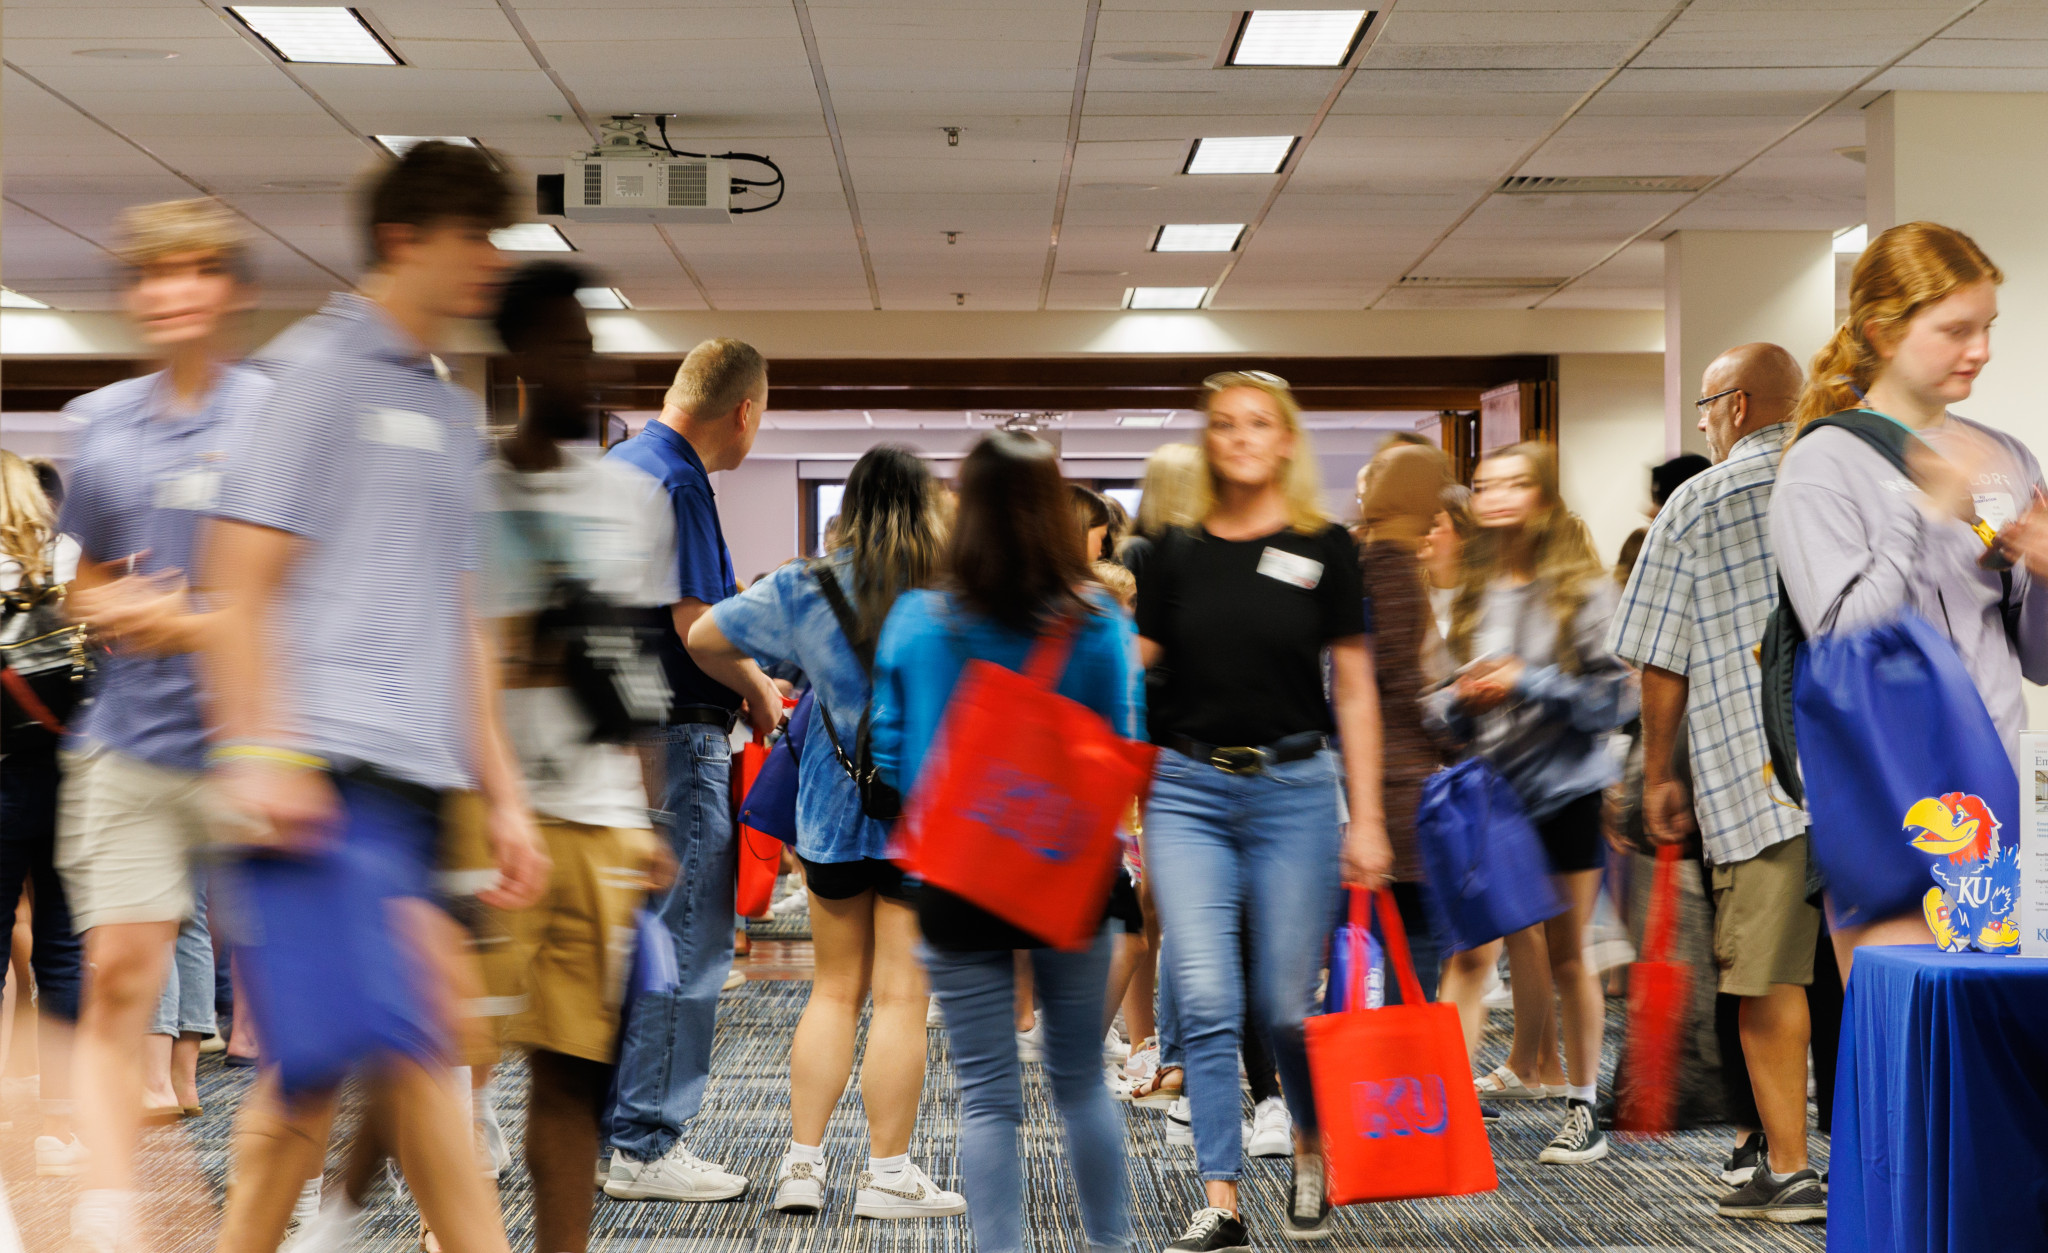 Students mingle in a hallway as they prepare for their next Orientation session.